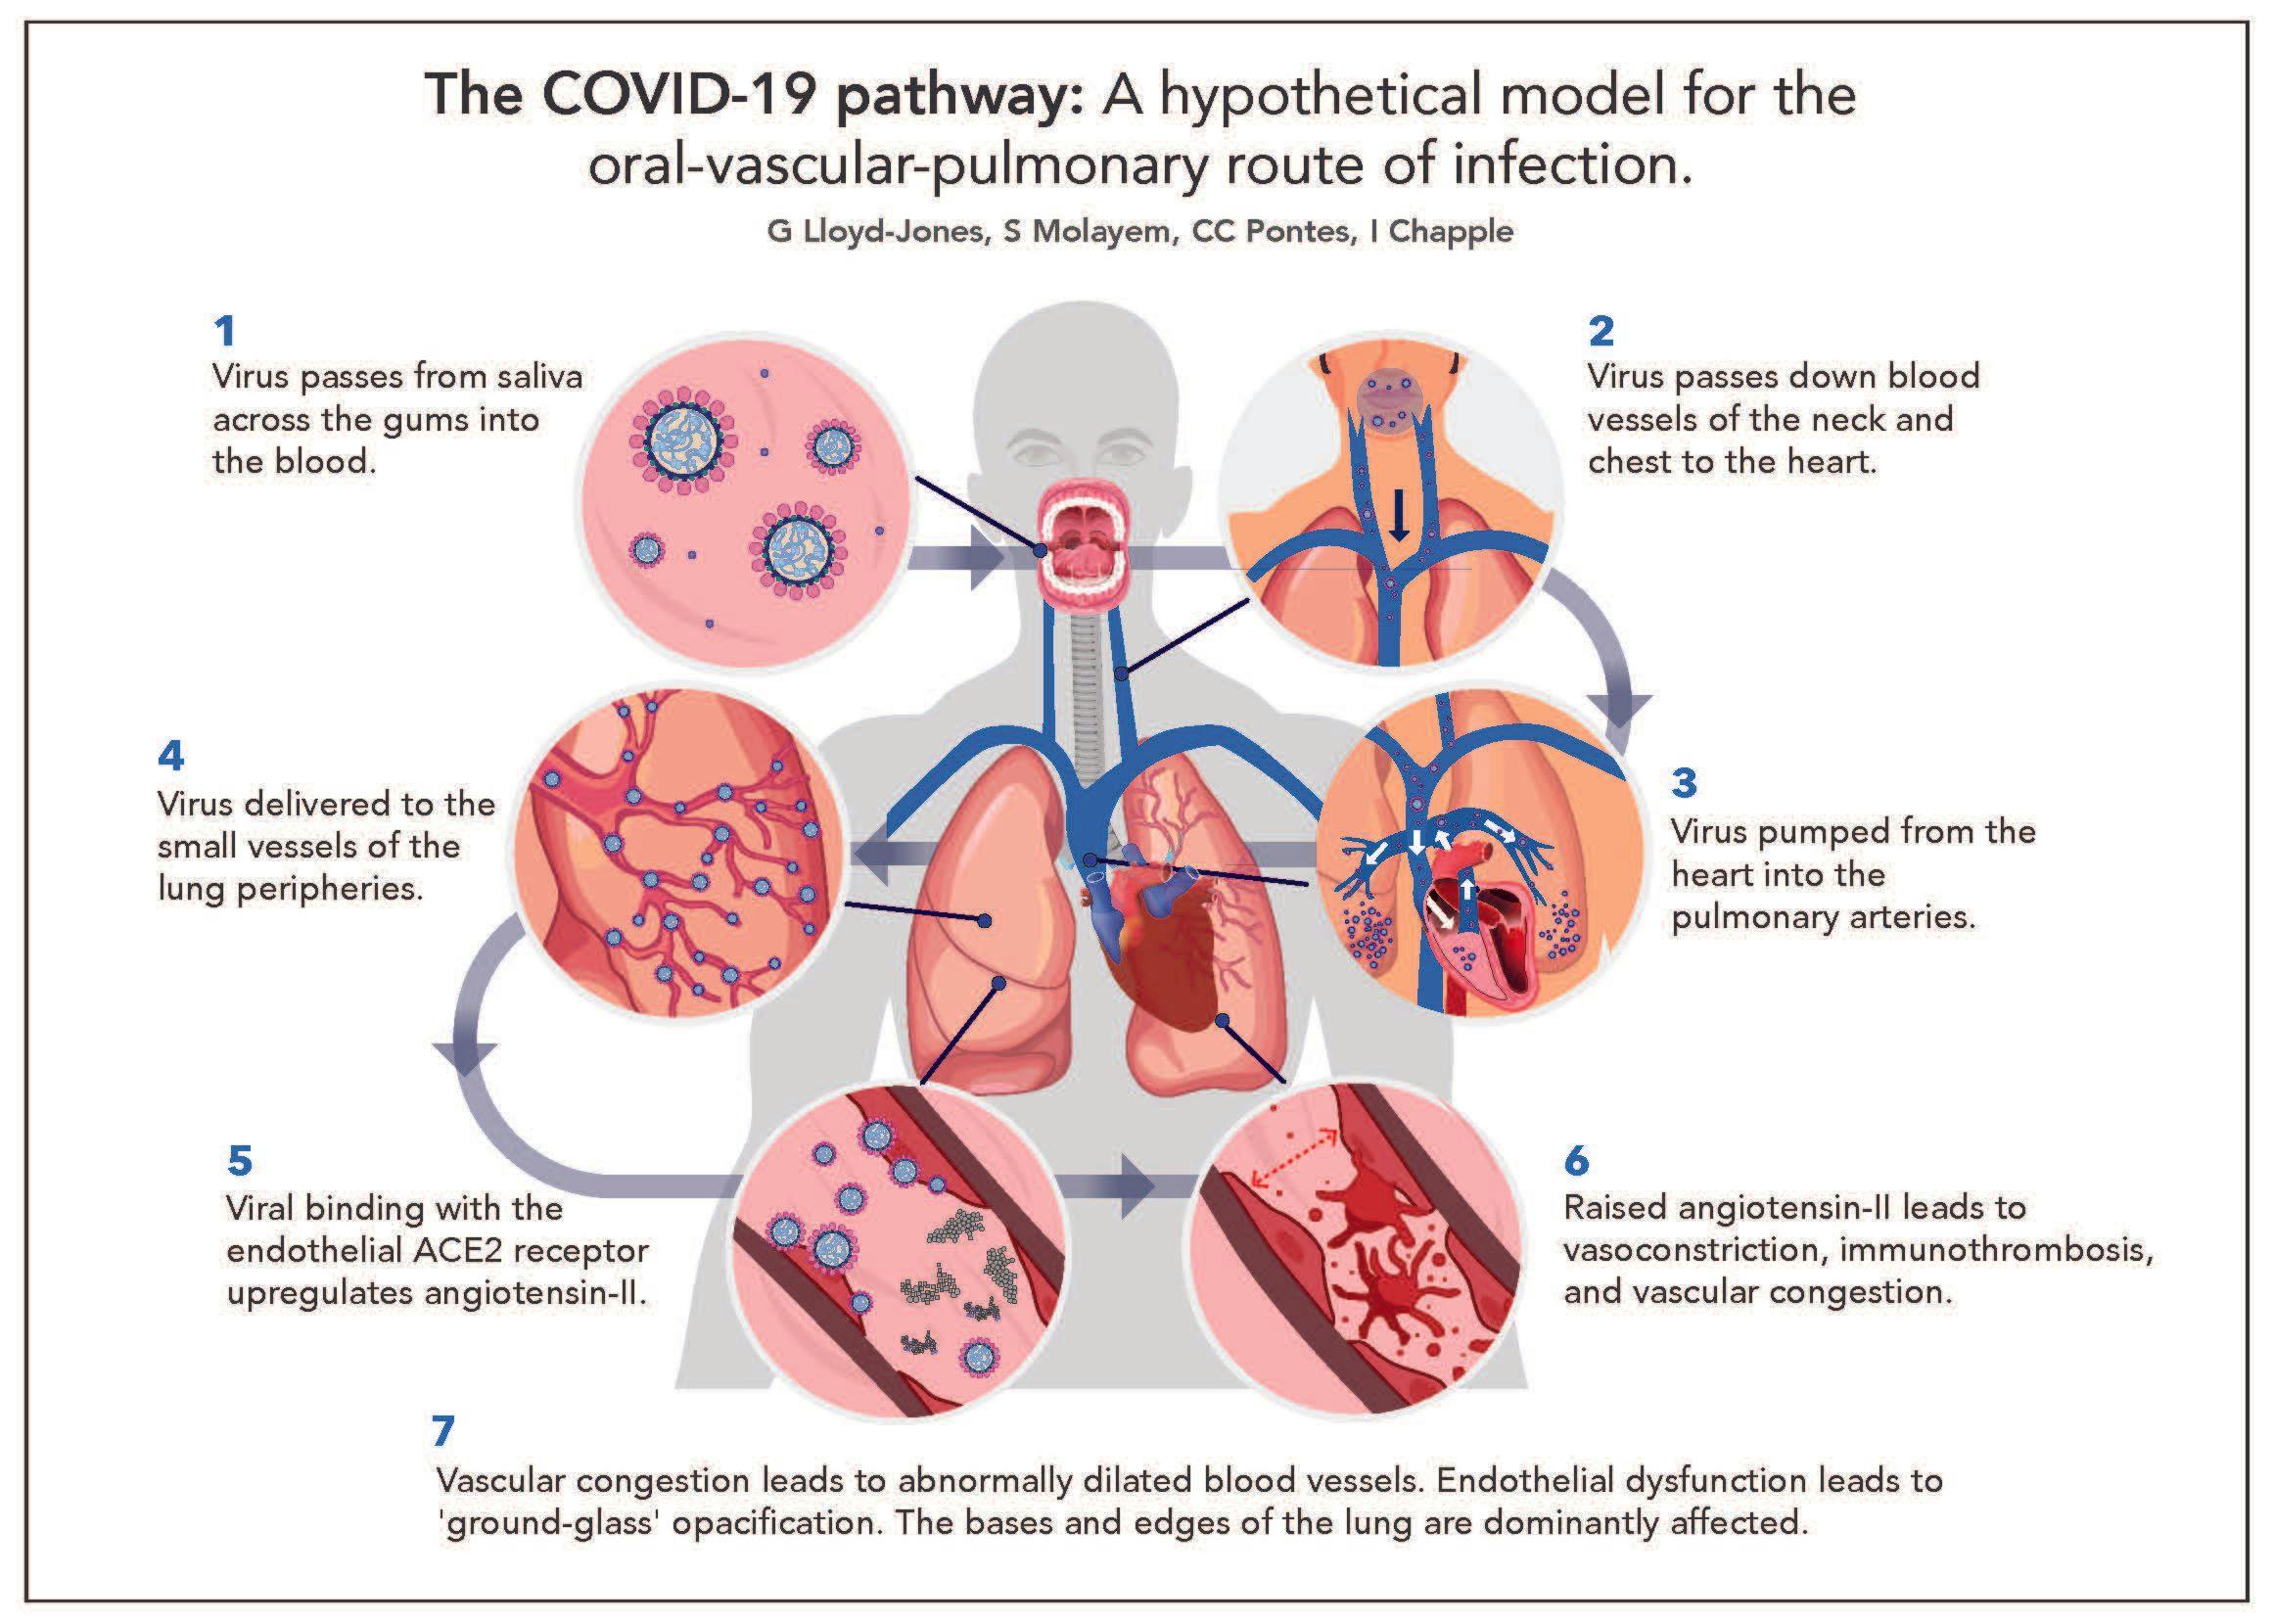 New Research Shows Link Between COVID-19 Transmission and Poor Oral Hygiene